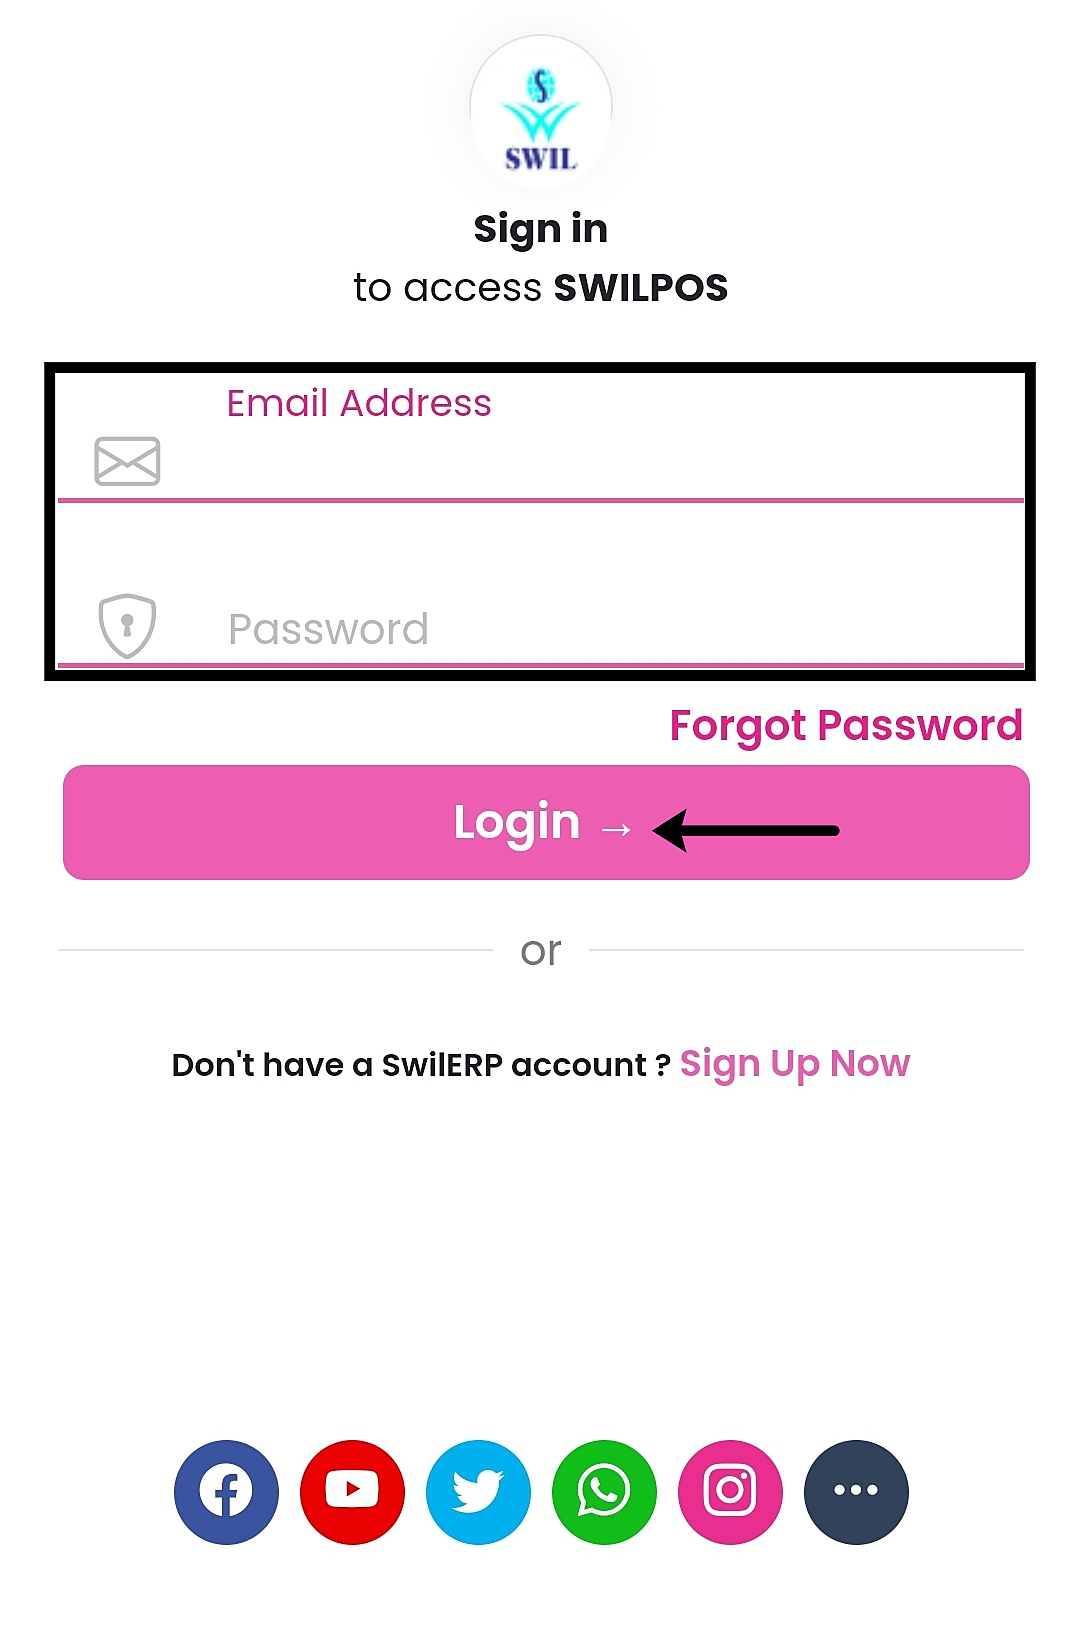 Login screen of SWILPOS app with fields for email and password and social media login options.